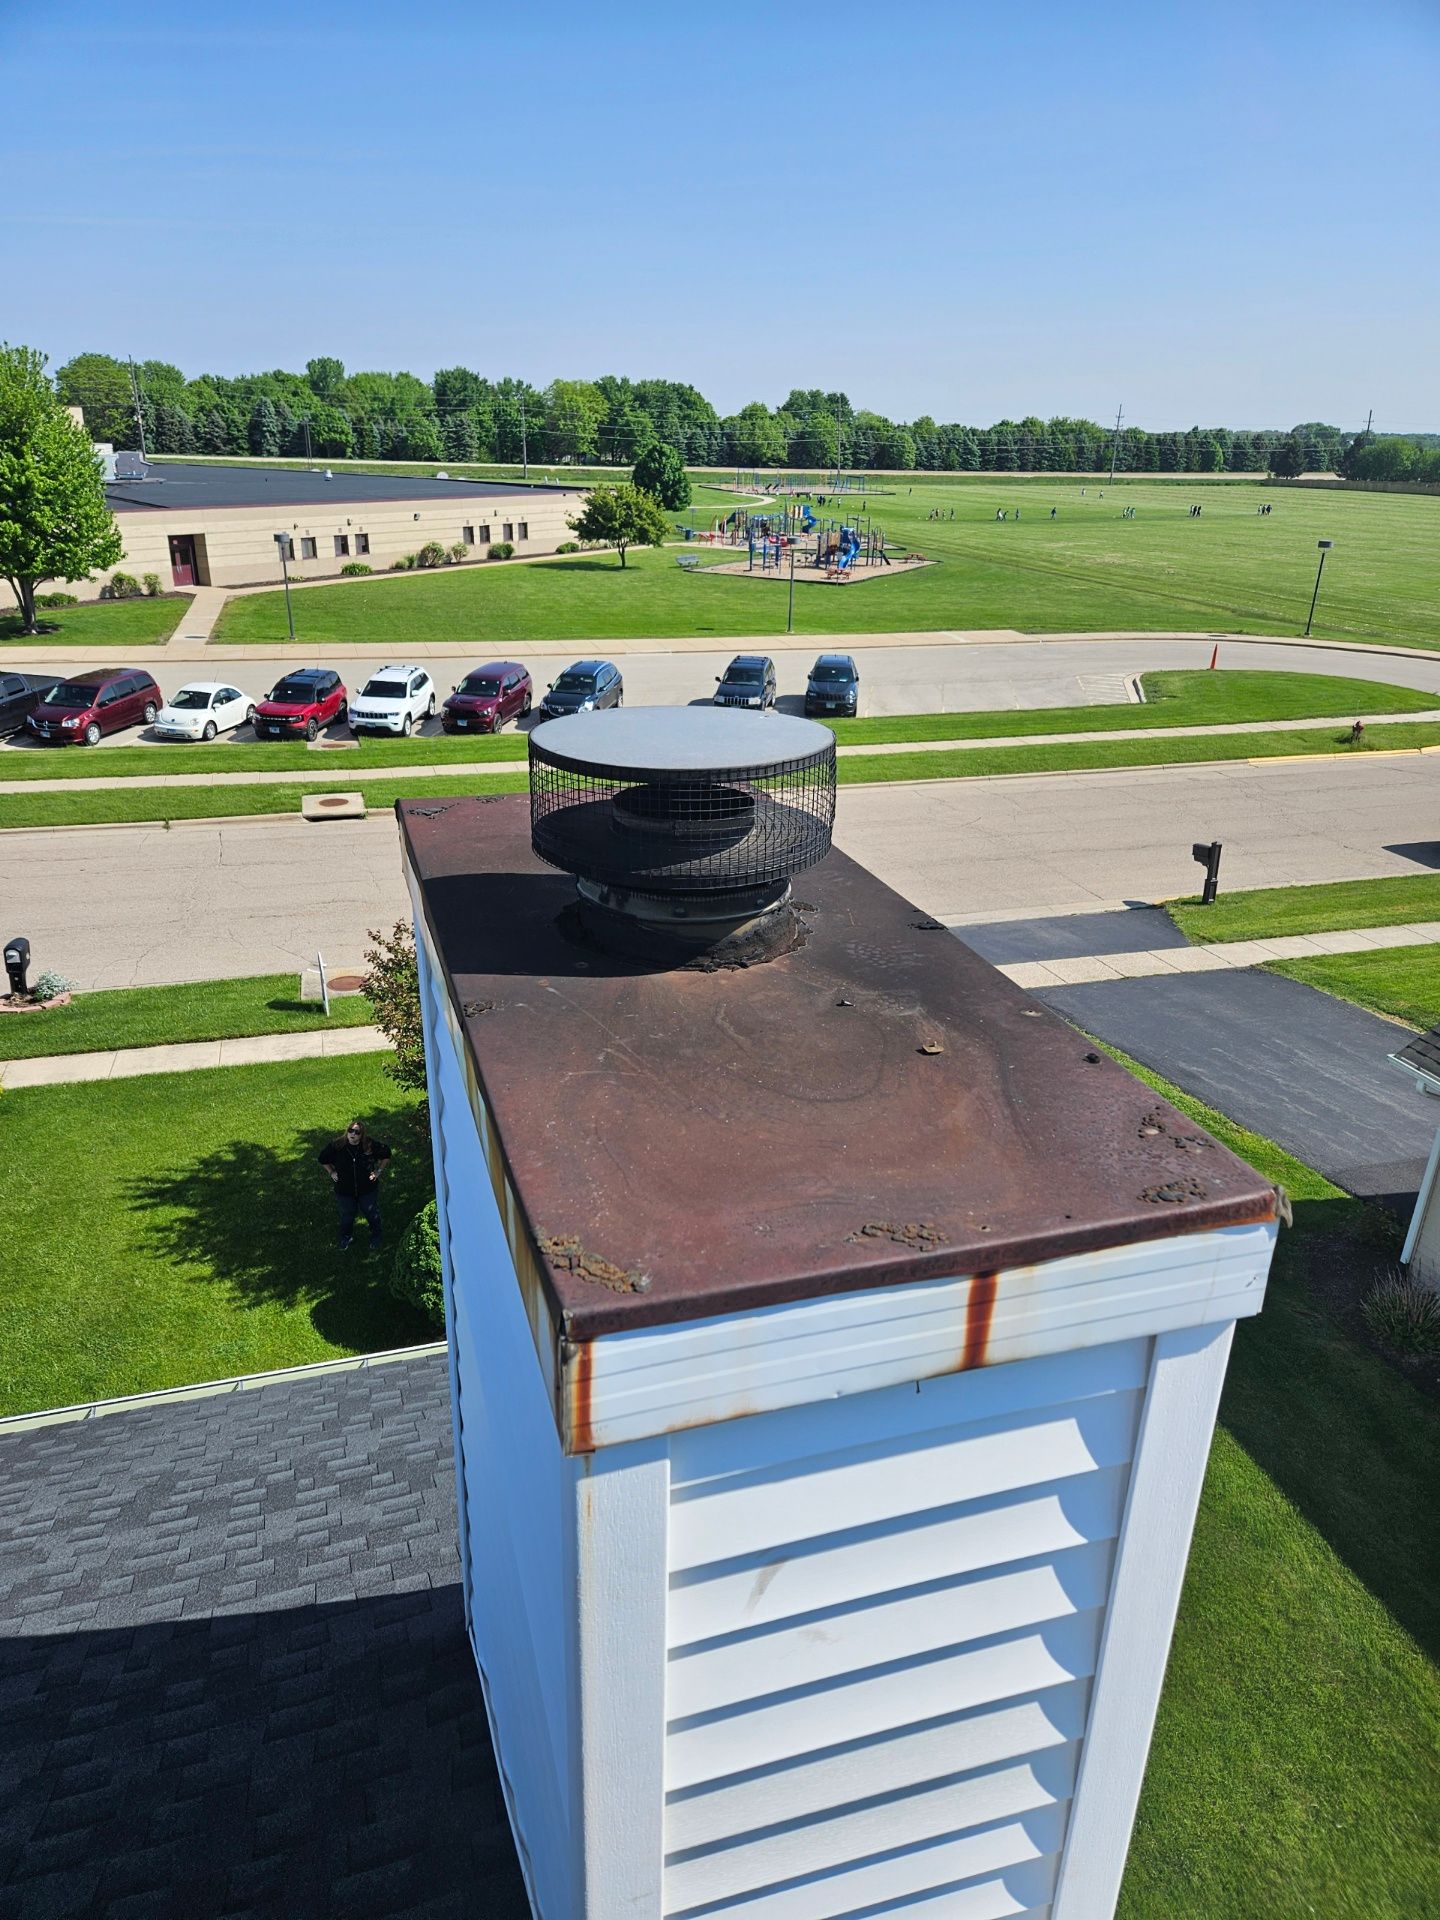 An aerial view of a chimney on top of a building.